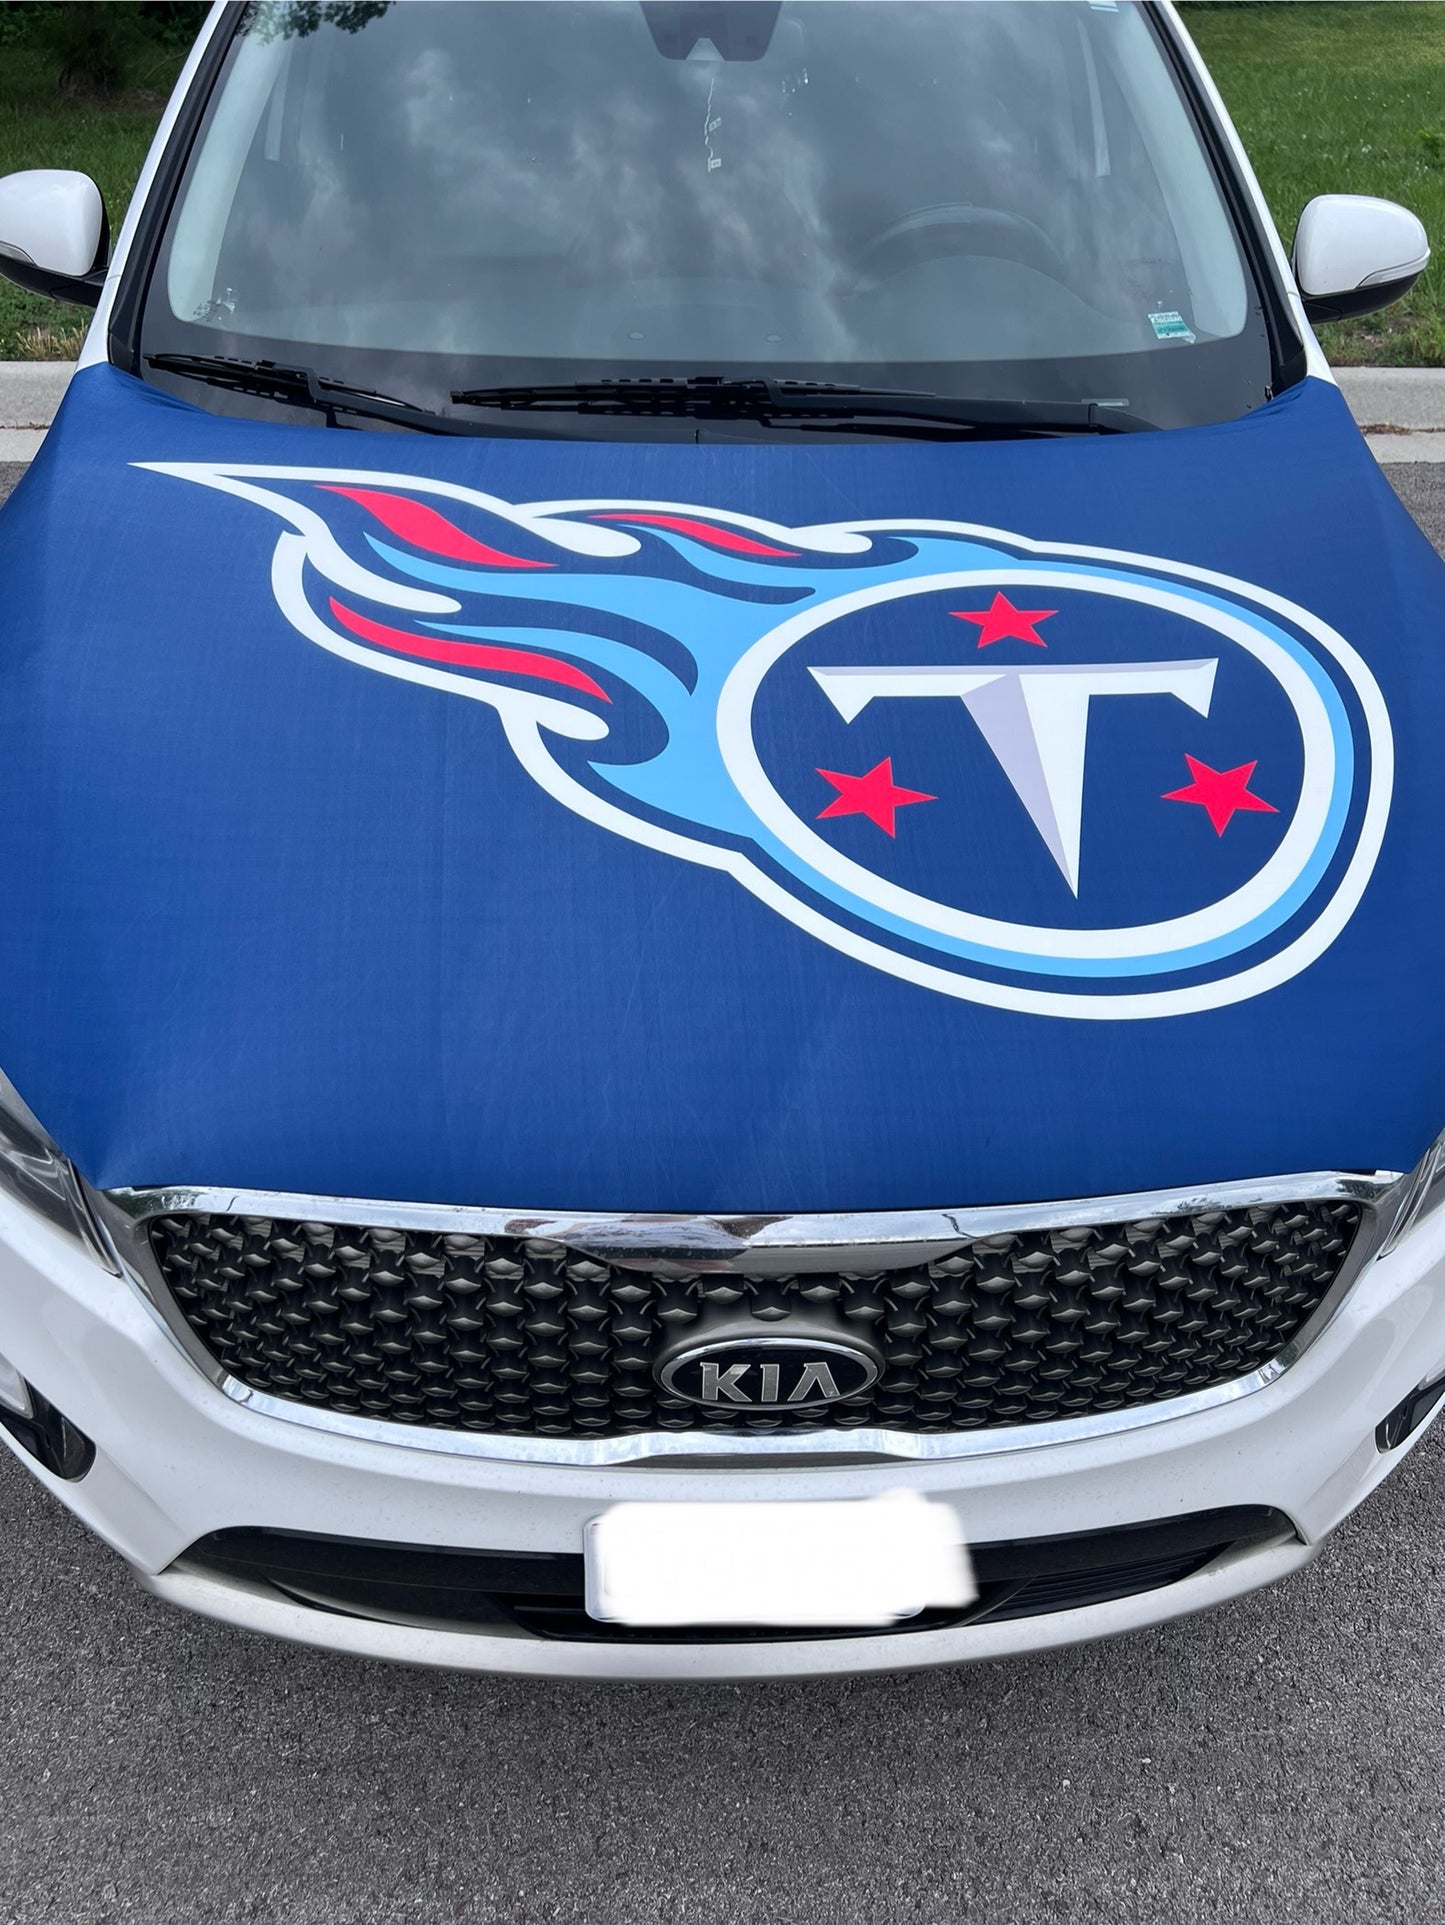 Tennessee Titans Car Hood Cover